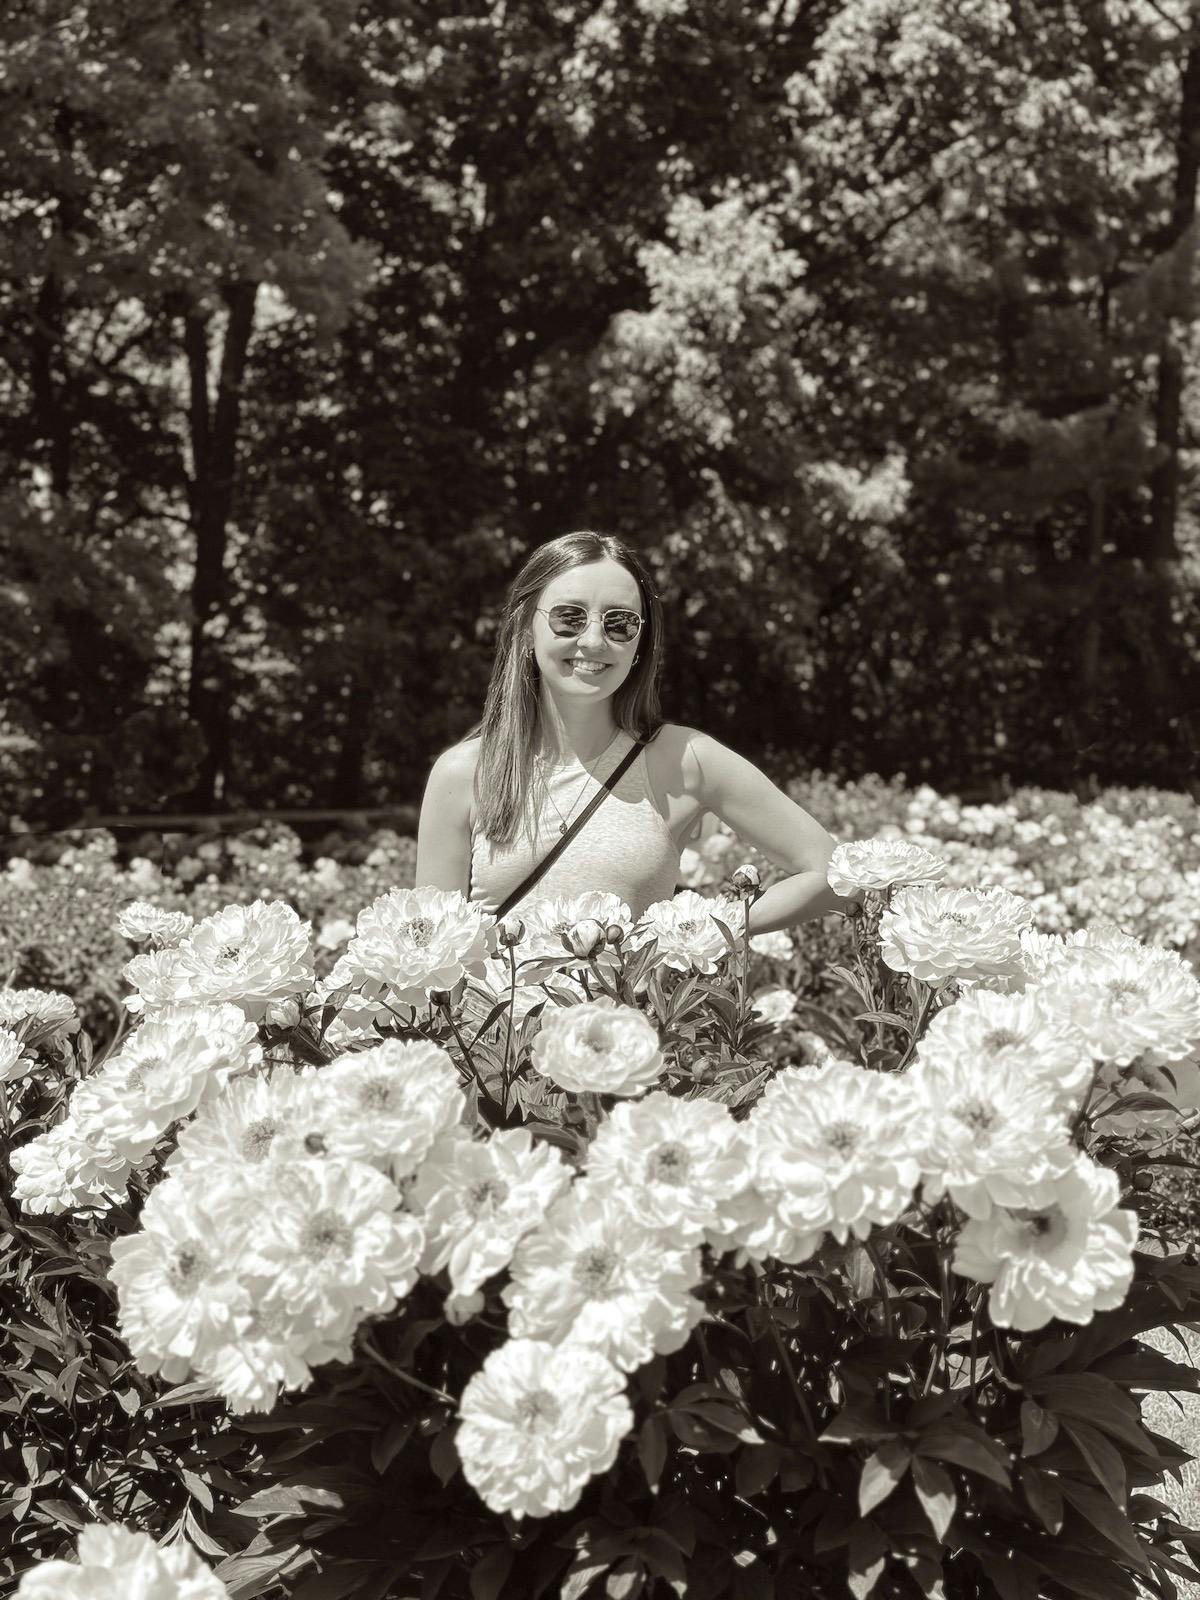 Black and white photo of Jennifer wearing sunglasses, smiling during a sunny day in a garden full of peonies